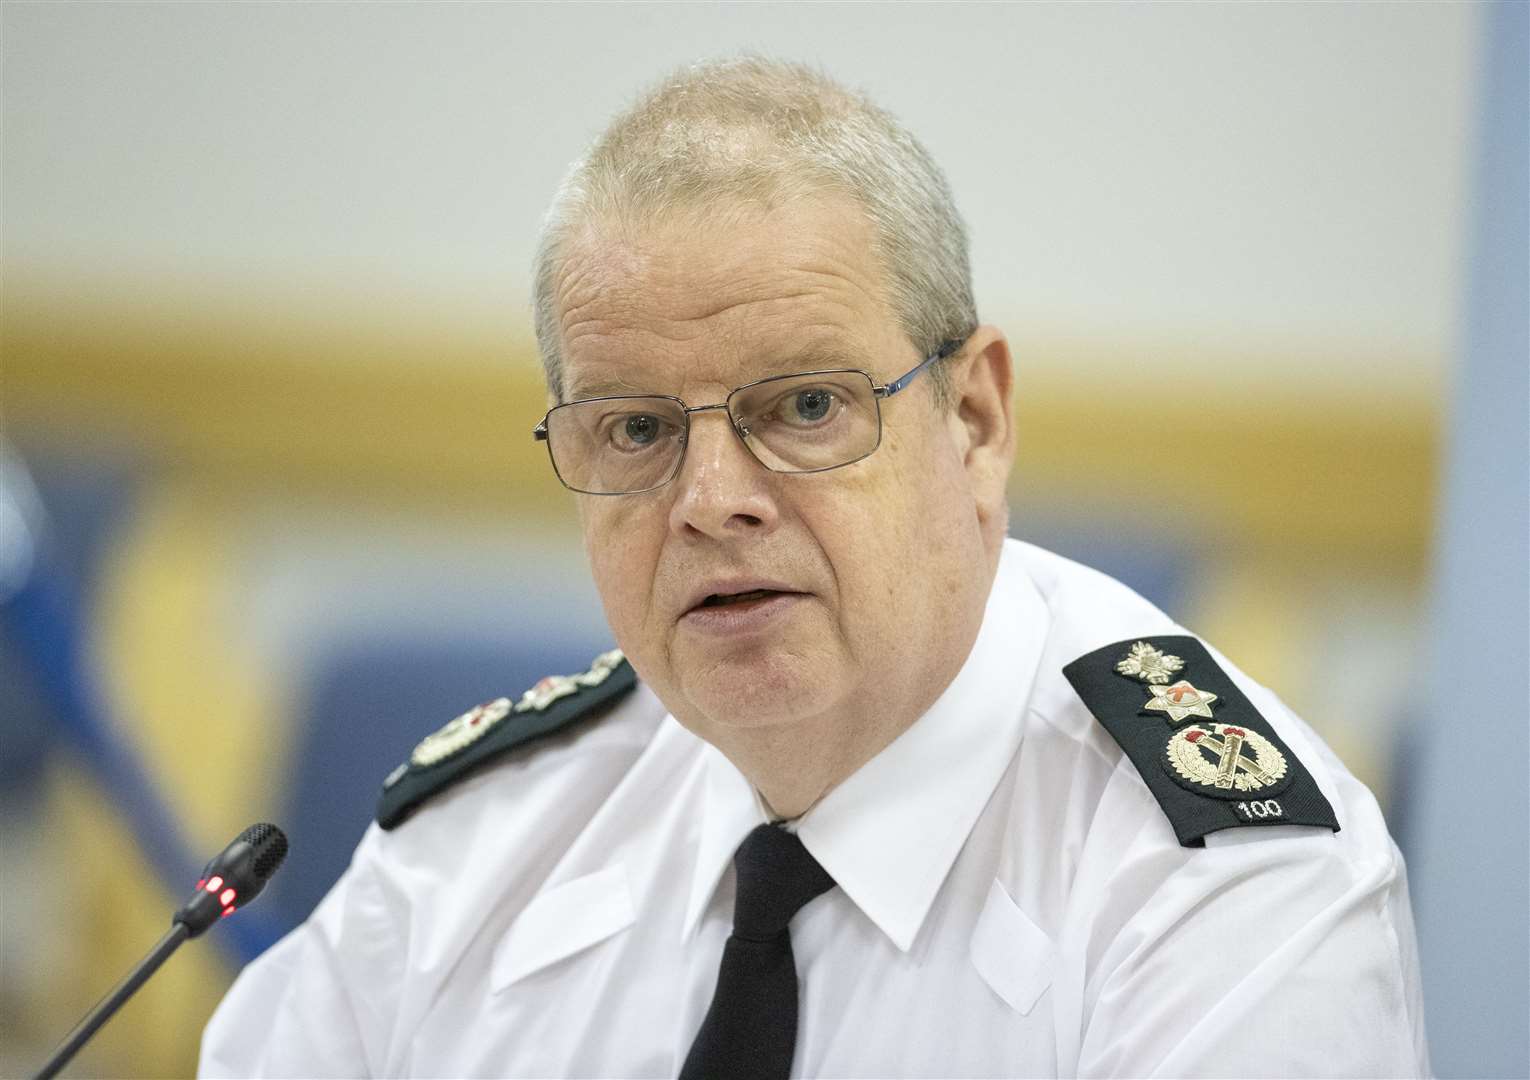 PSNI Chief Constable Simon Byrne briefed the Policing Board on the operation surrounding President Biden’s visit (Liam McBurney/PA)